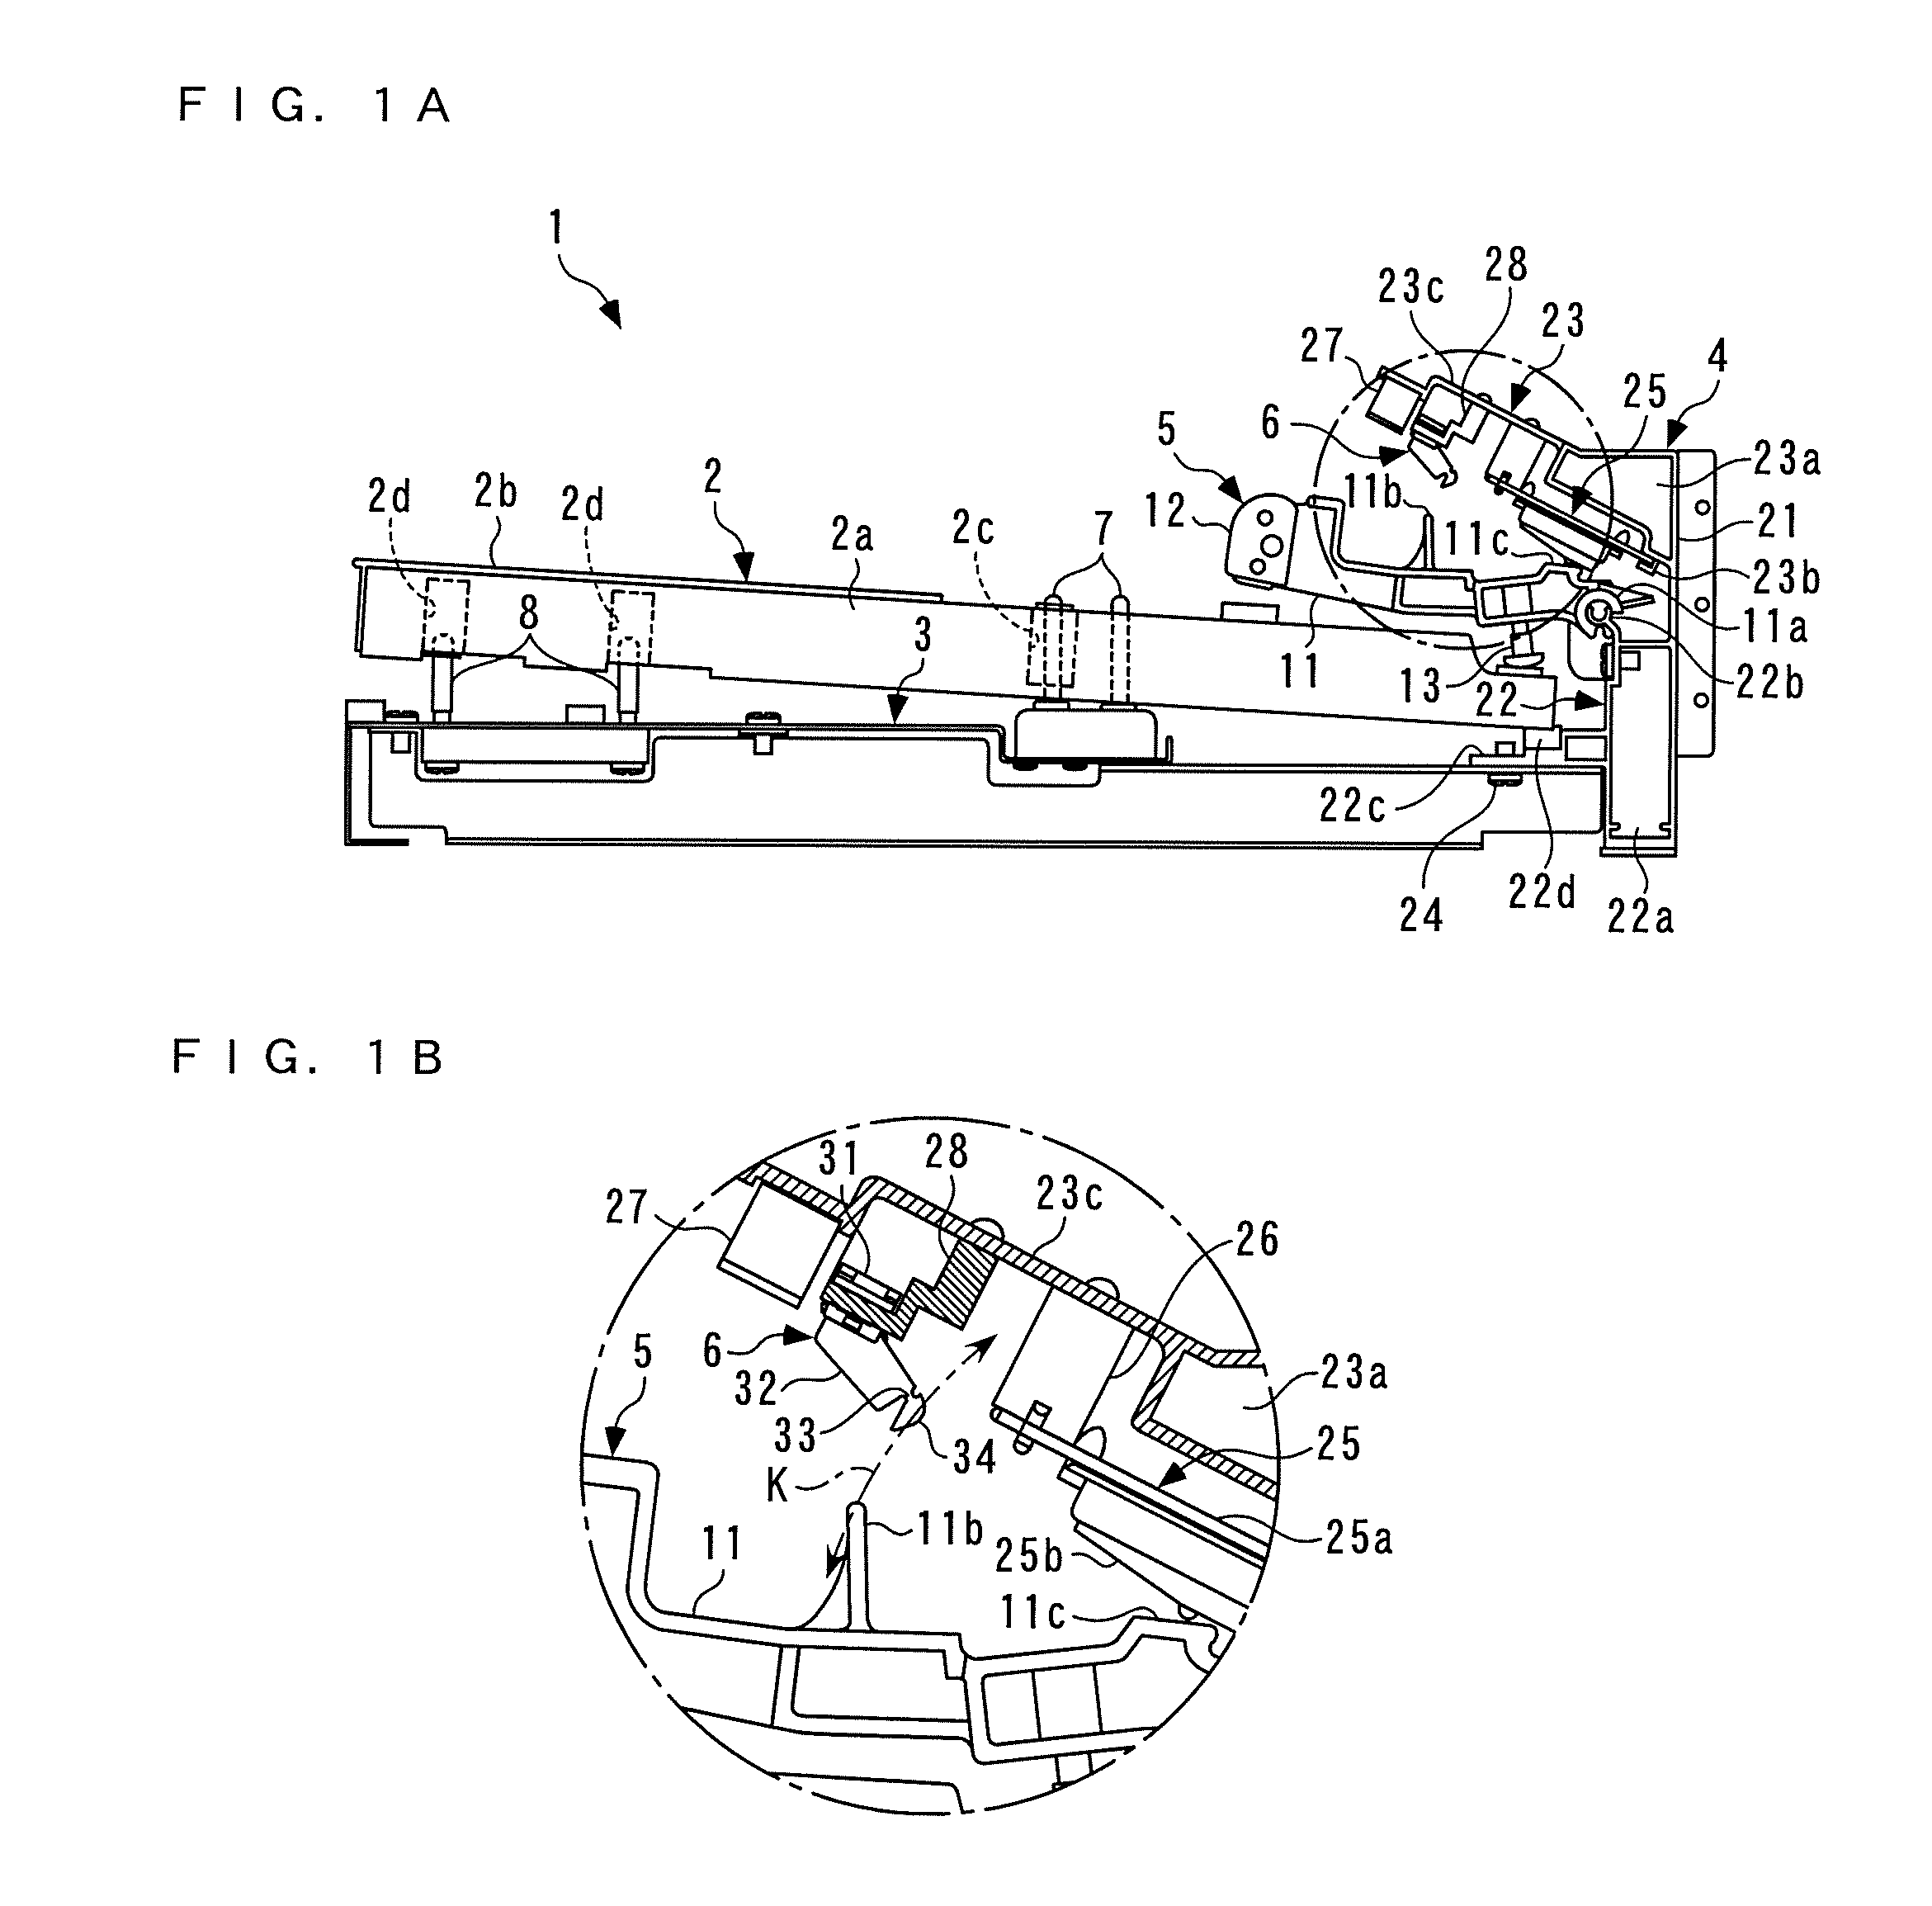 Keyboard device for electronic keyboard instrument